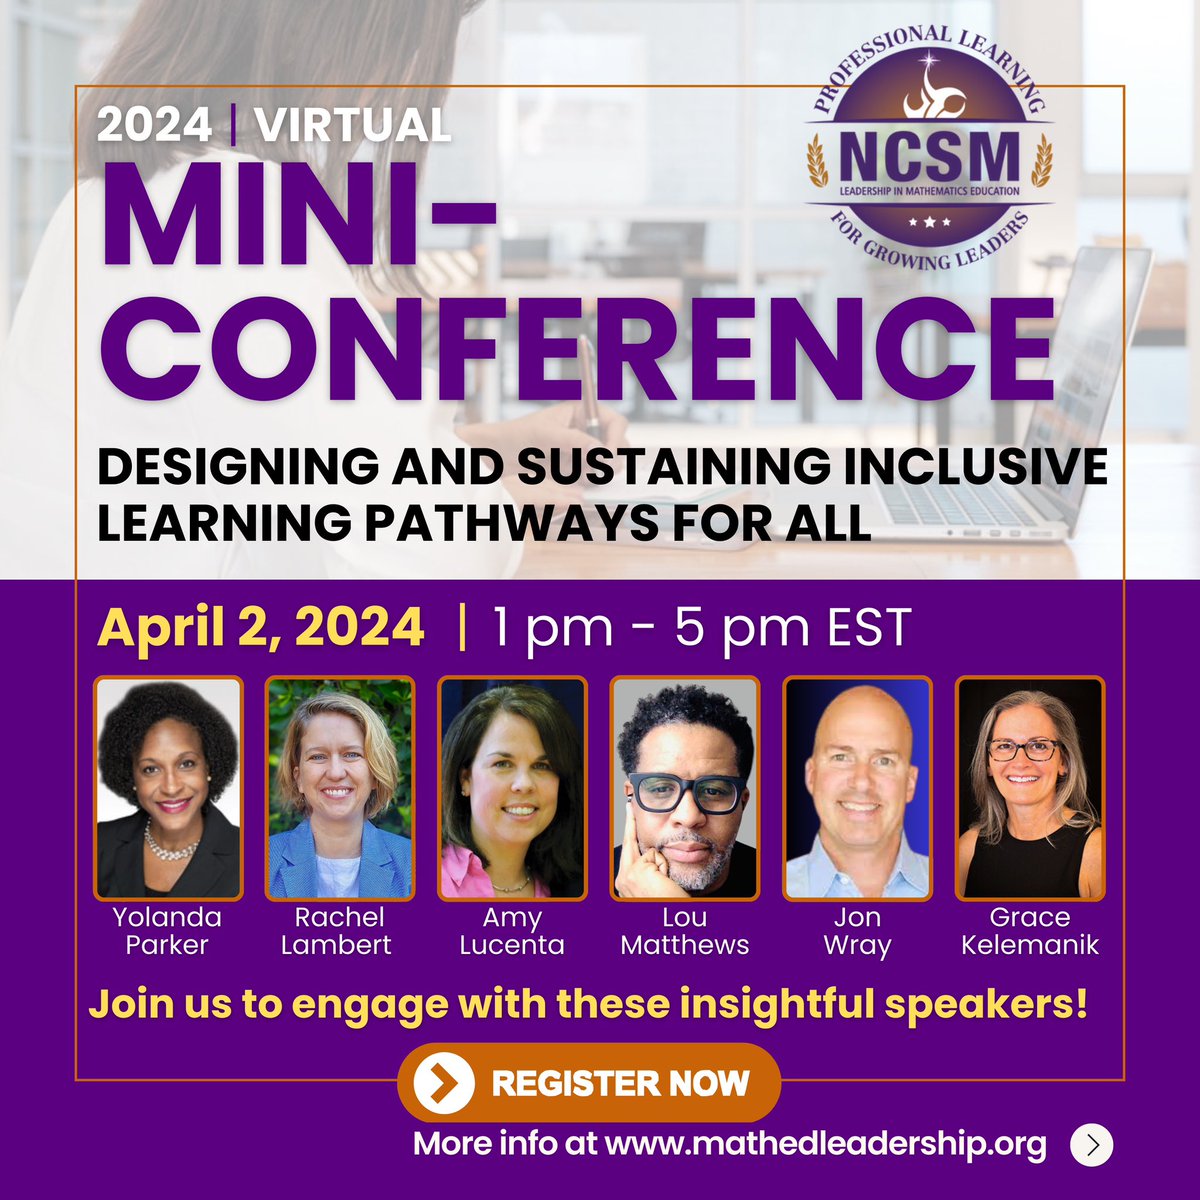 🗓️ Mark your calendars for NCSM’s virtual Mini-Conference on April 2nd! Hear from dynamic speakers, network with other leaders, and restock your toolbox. Register now at ncsm.memberclicks.net/2024-virtual-m… #NCSMBOLD #April2nd